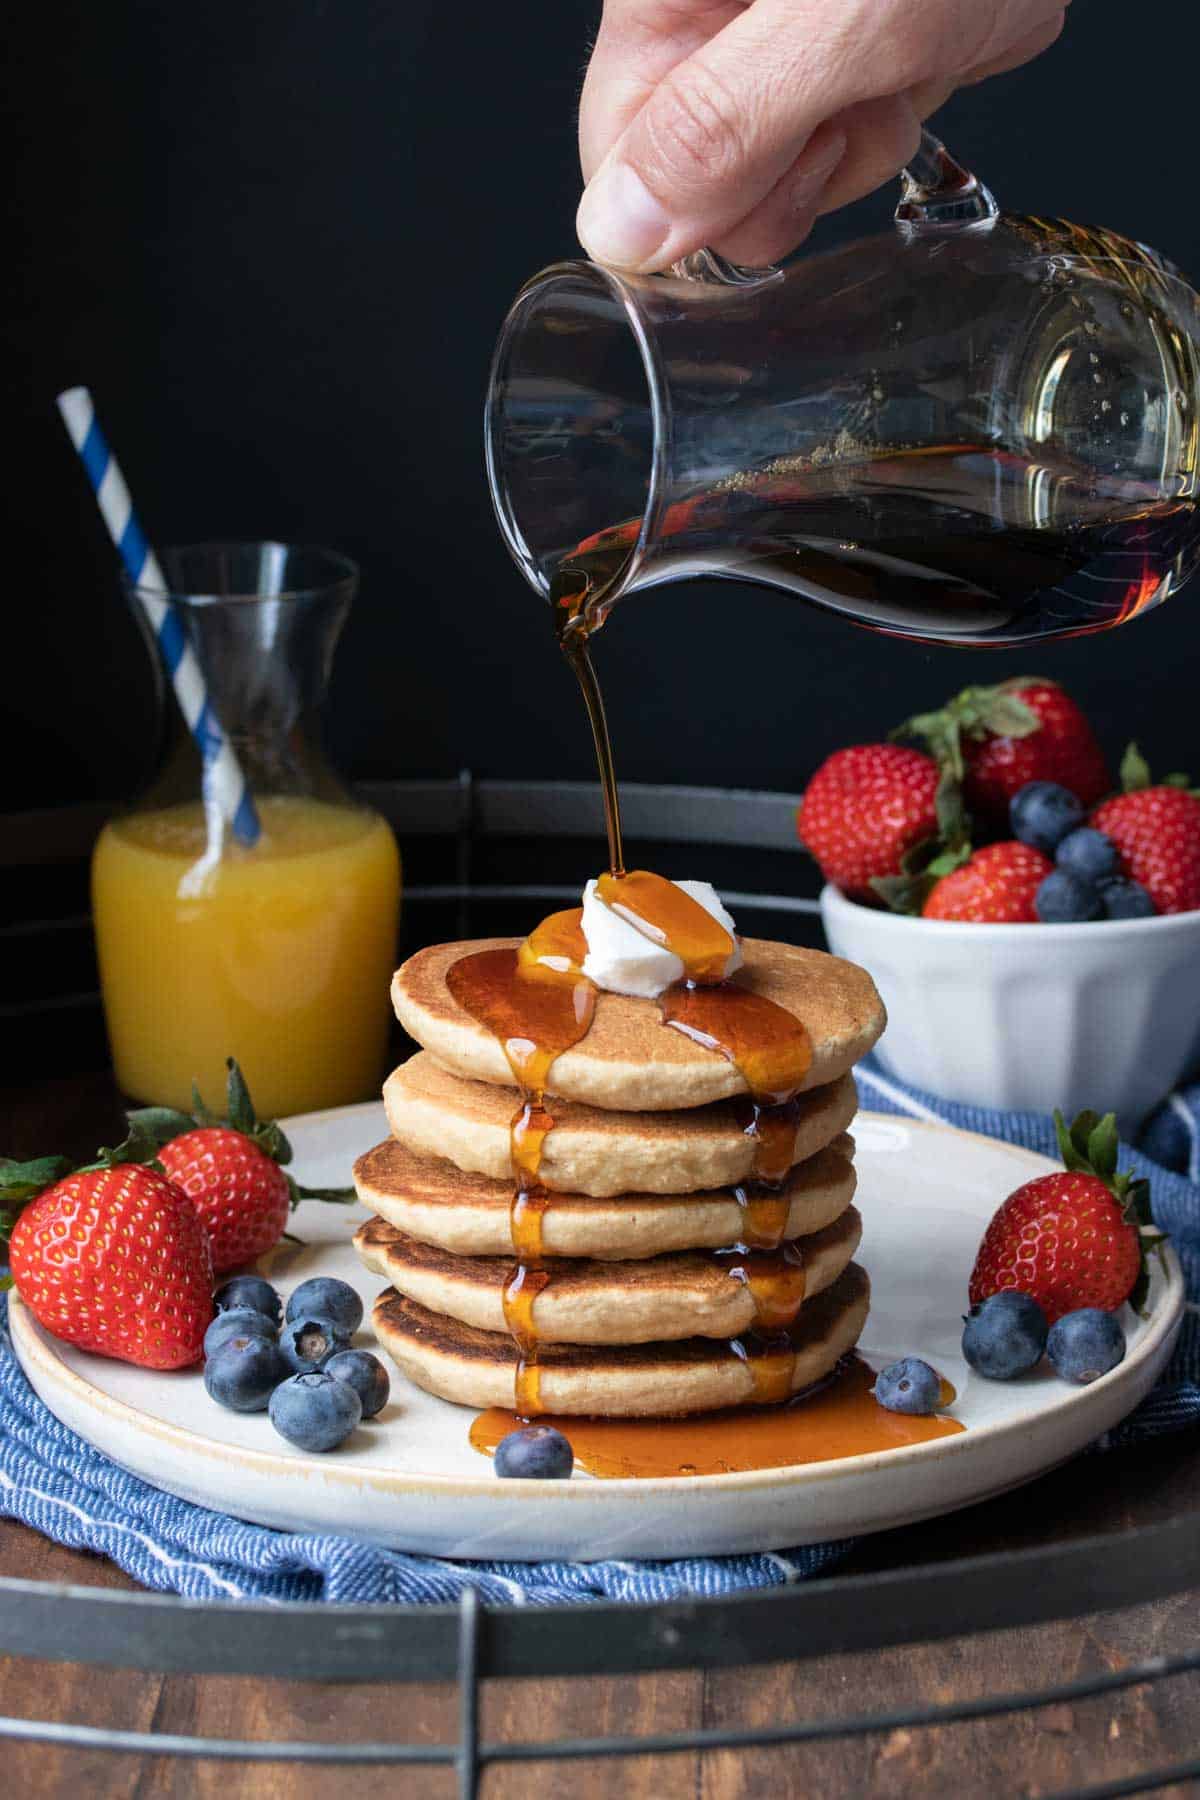 Maple syrup being poured over a stack of five pancakes on a white plate